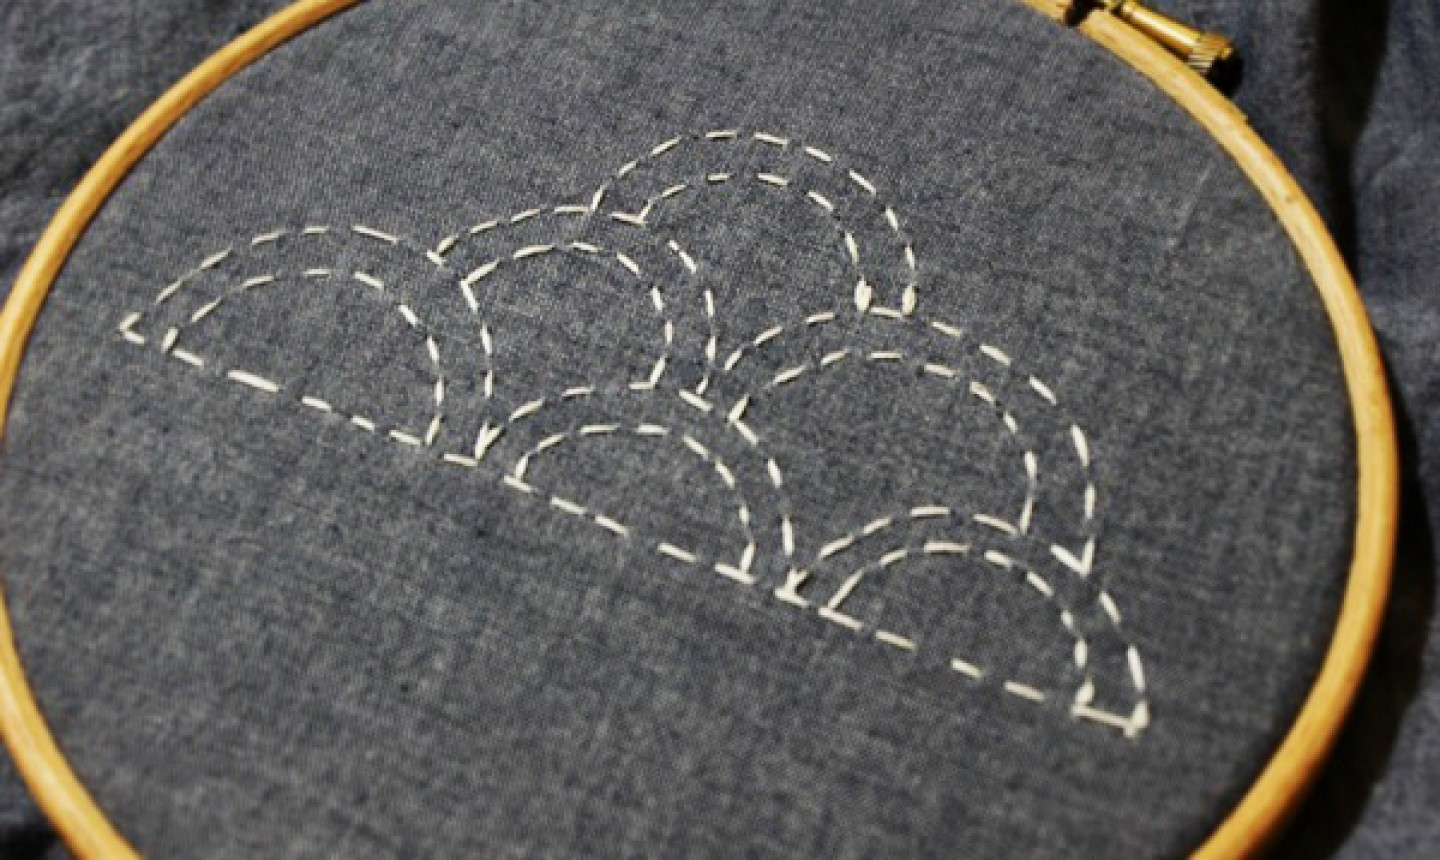 Free Paper Embroidery Patterns And Instructions Learn Simple Sashiko Embroidery With This Whimsical Cloud Pattern